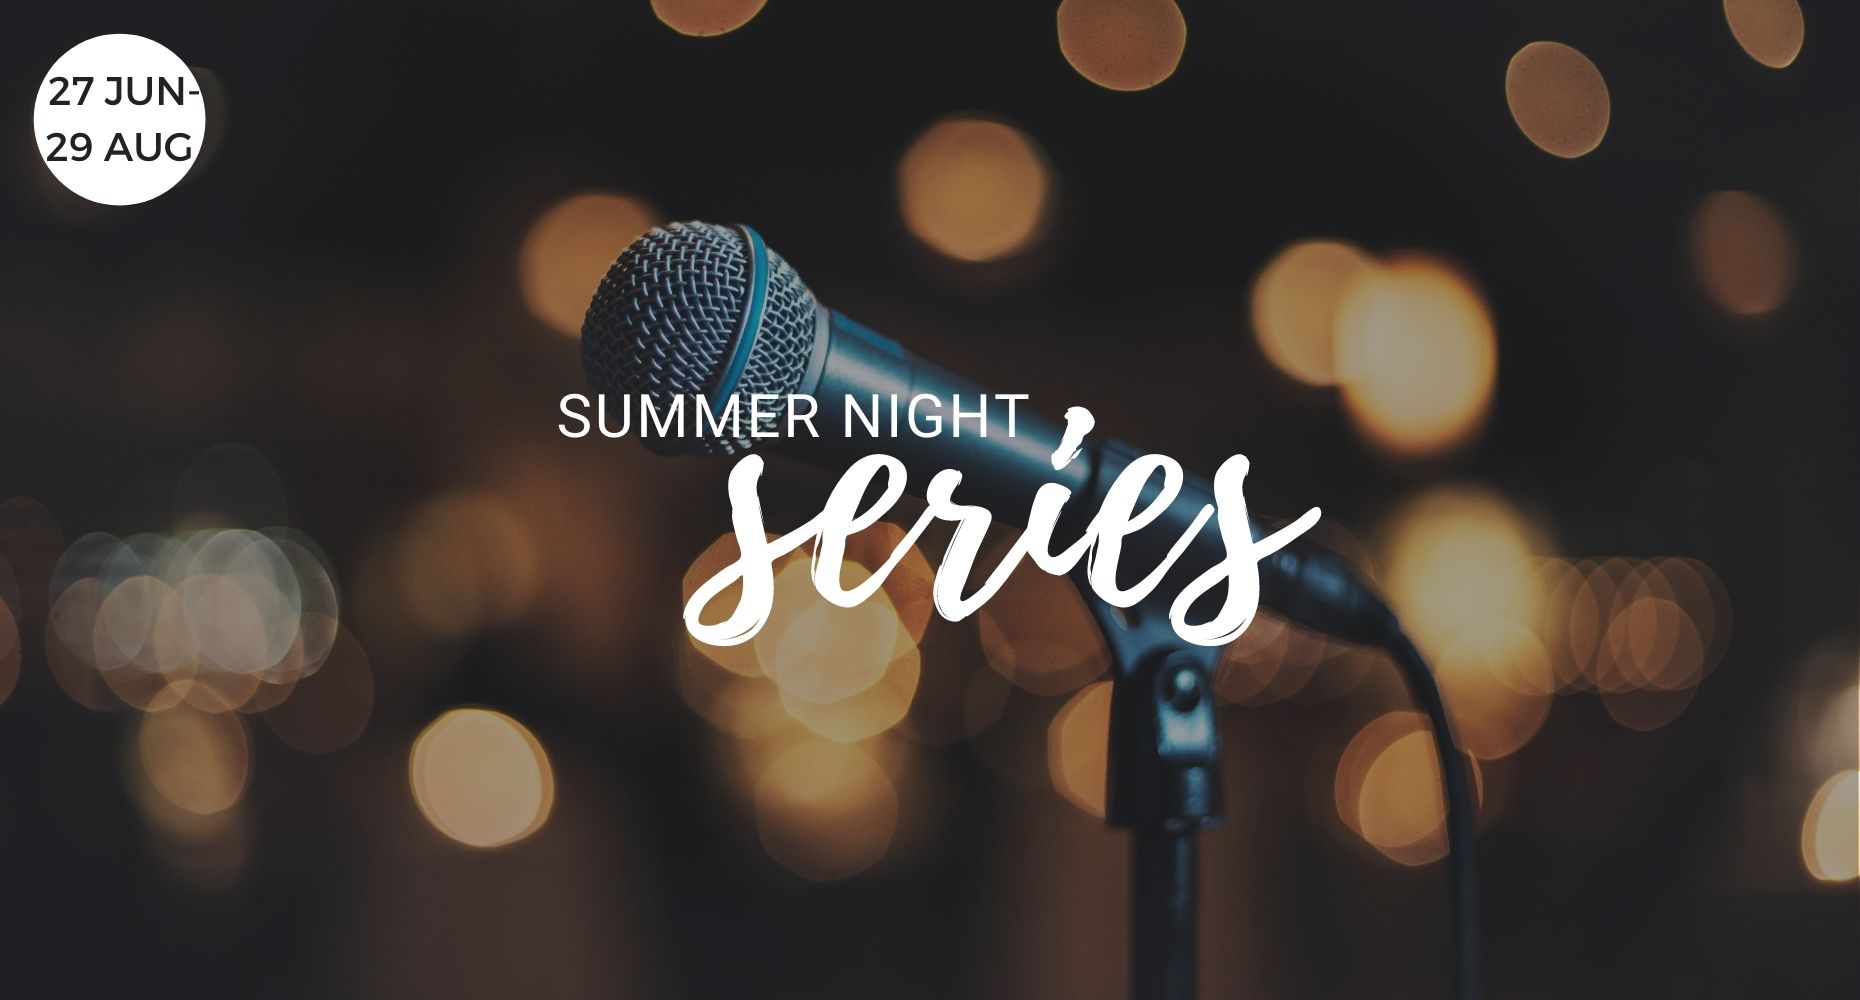 Summer Night Series , Happy Hour, Under the tent, Whidbey Island, Events, Washington, Things to do, music, Summer